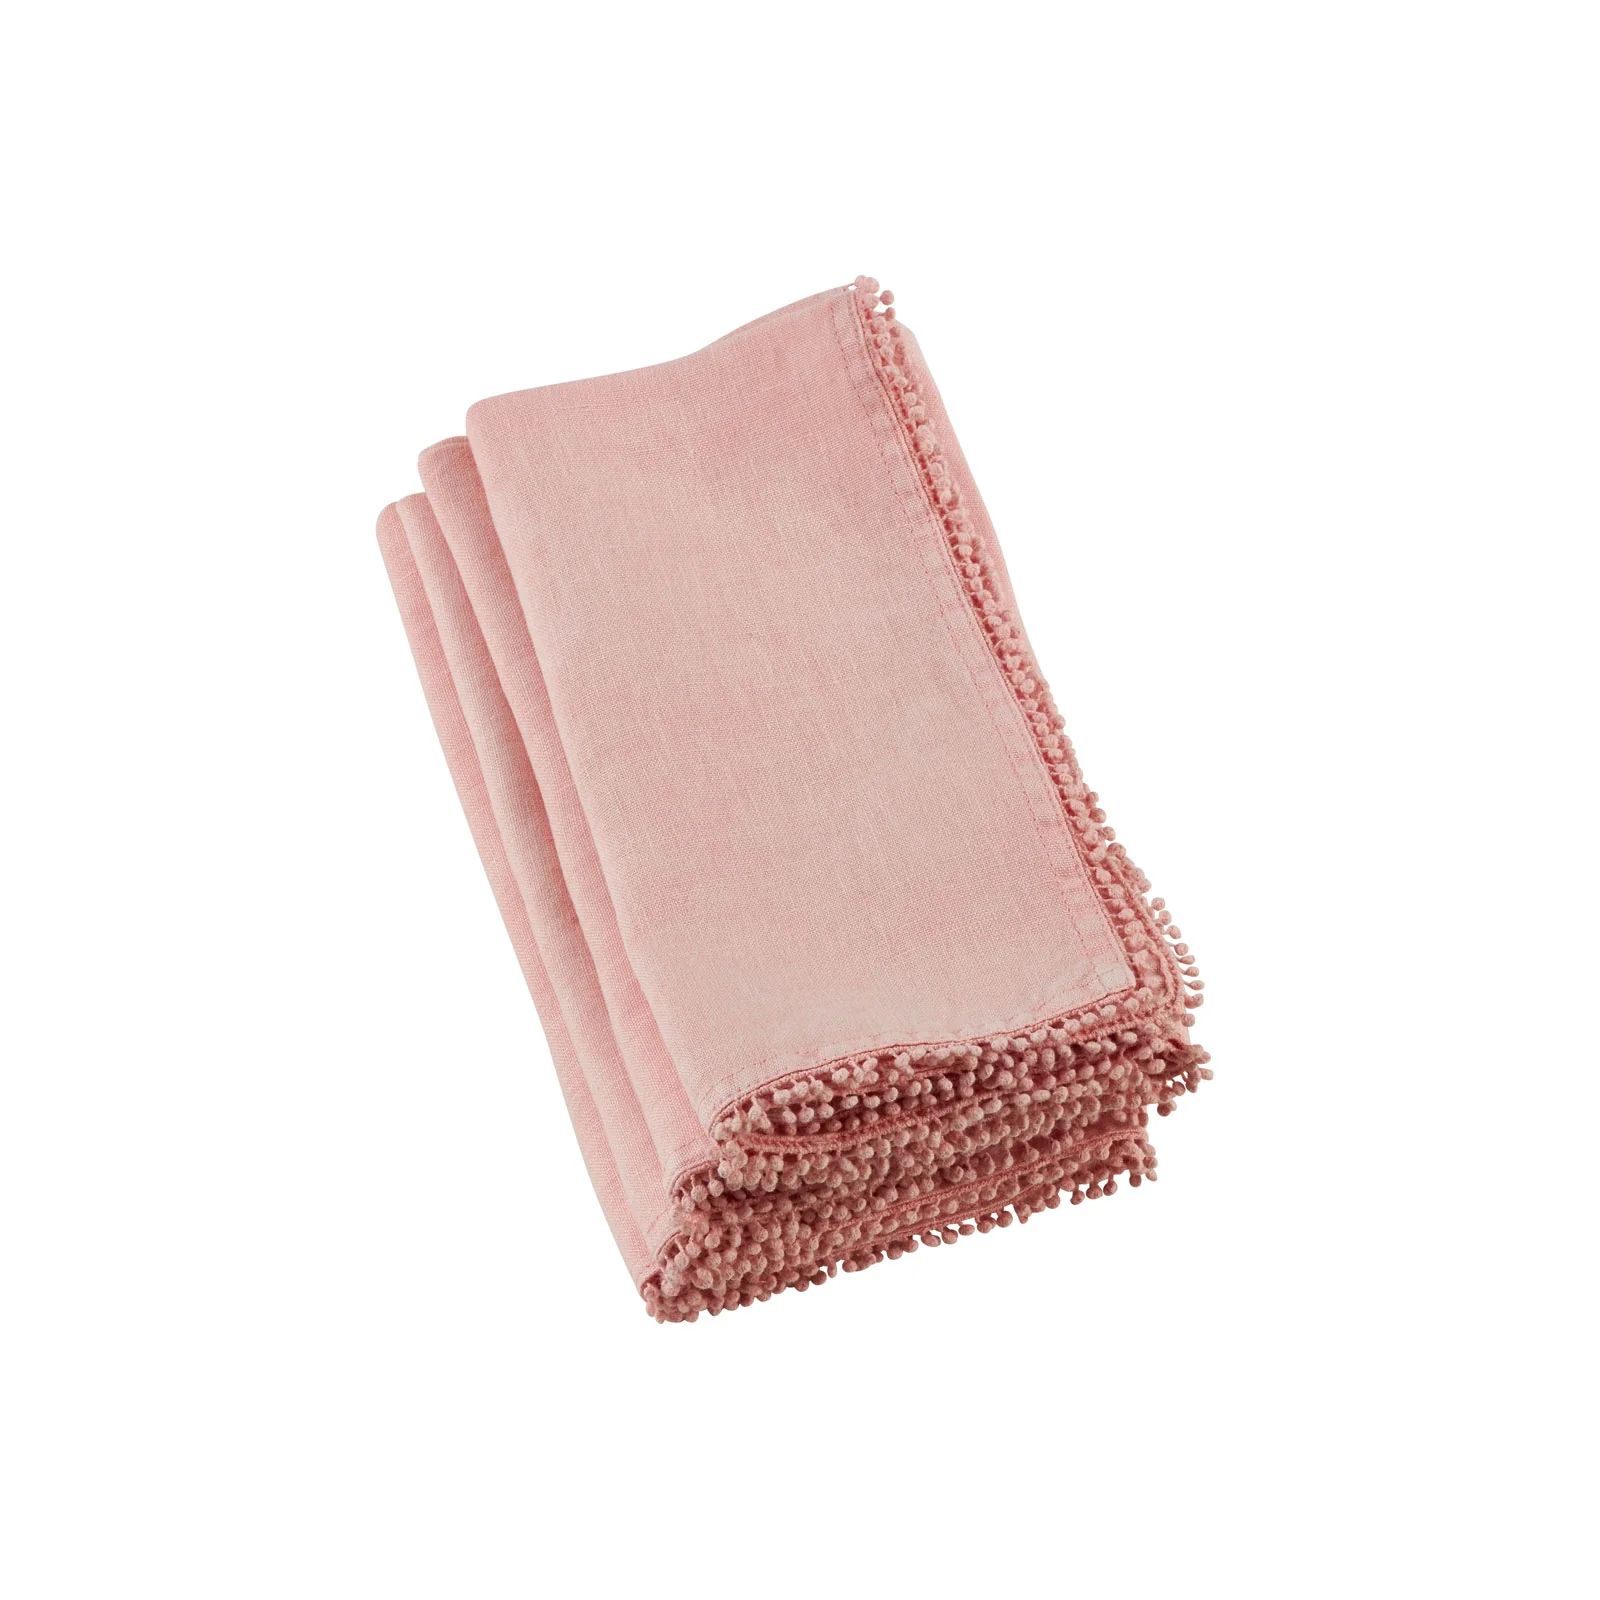 Dolly Napkins in Soft Coral - Set of 6 | Brooke & Lou | Brooke and Lou